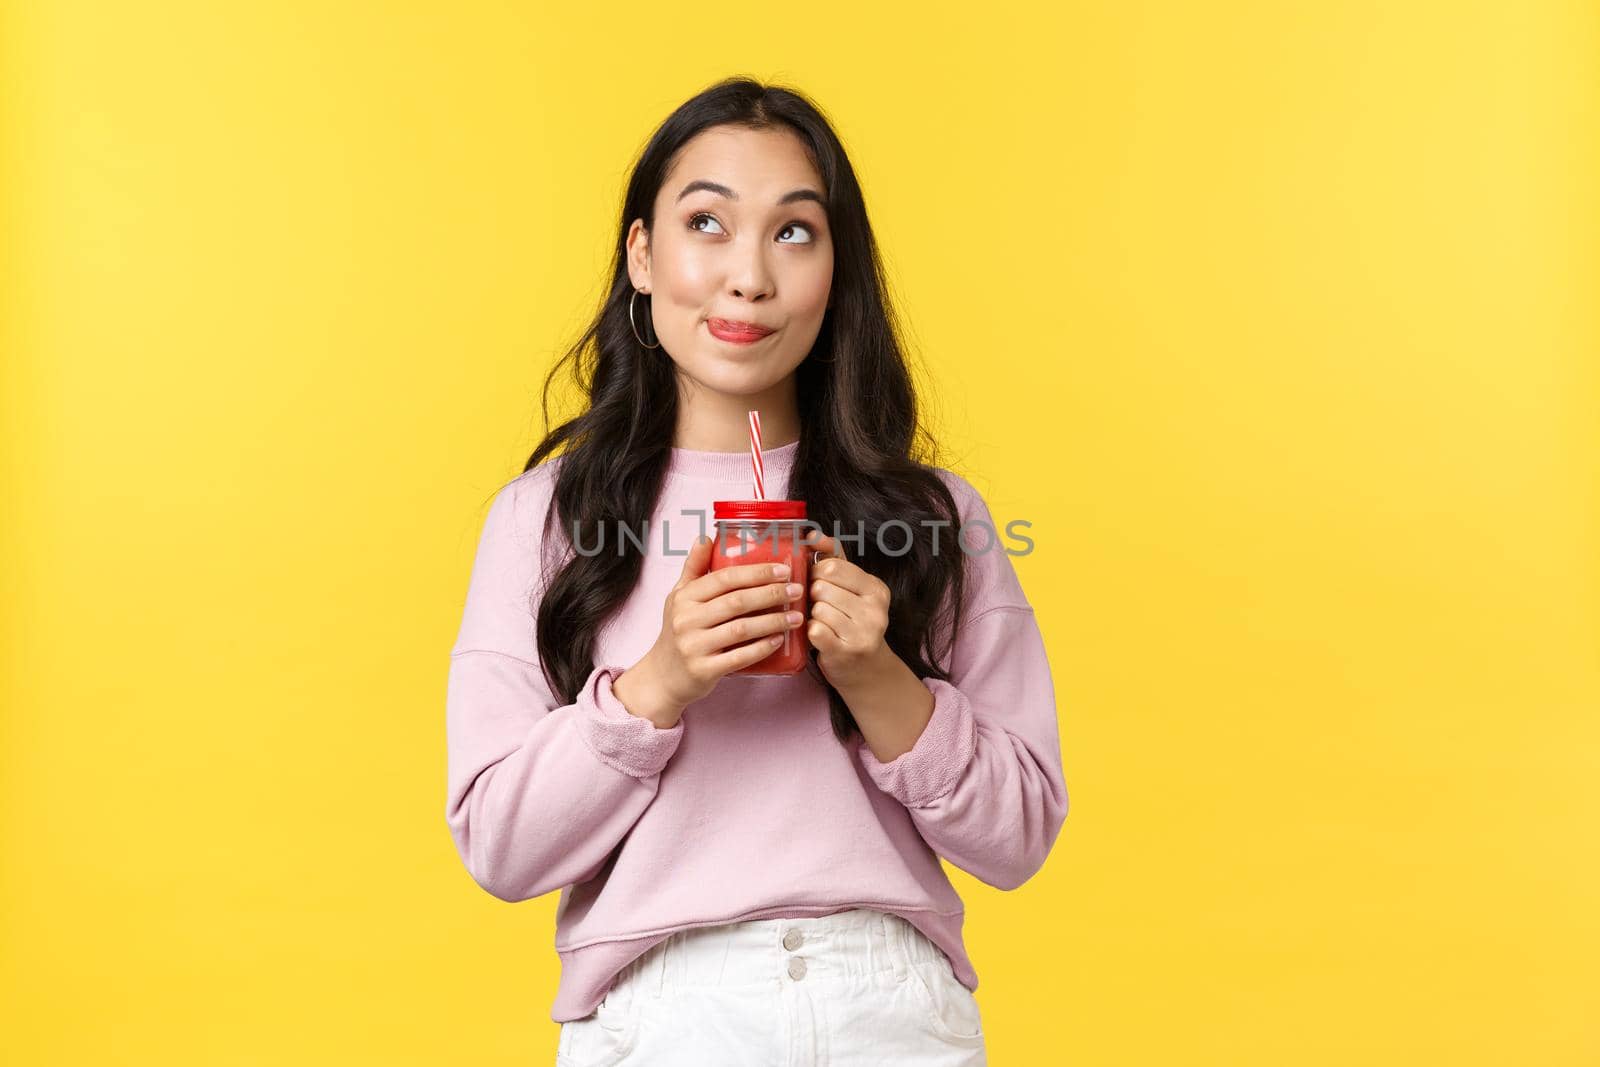 People emotions, lifestyle leisure and beauty concept. Dreamy and thoughtful, cute asian girl searching inspiration, looking up and thinking while drinking smoothie over yellow background.